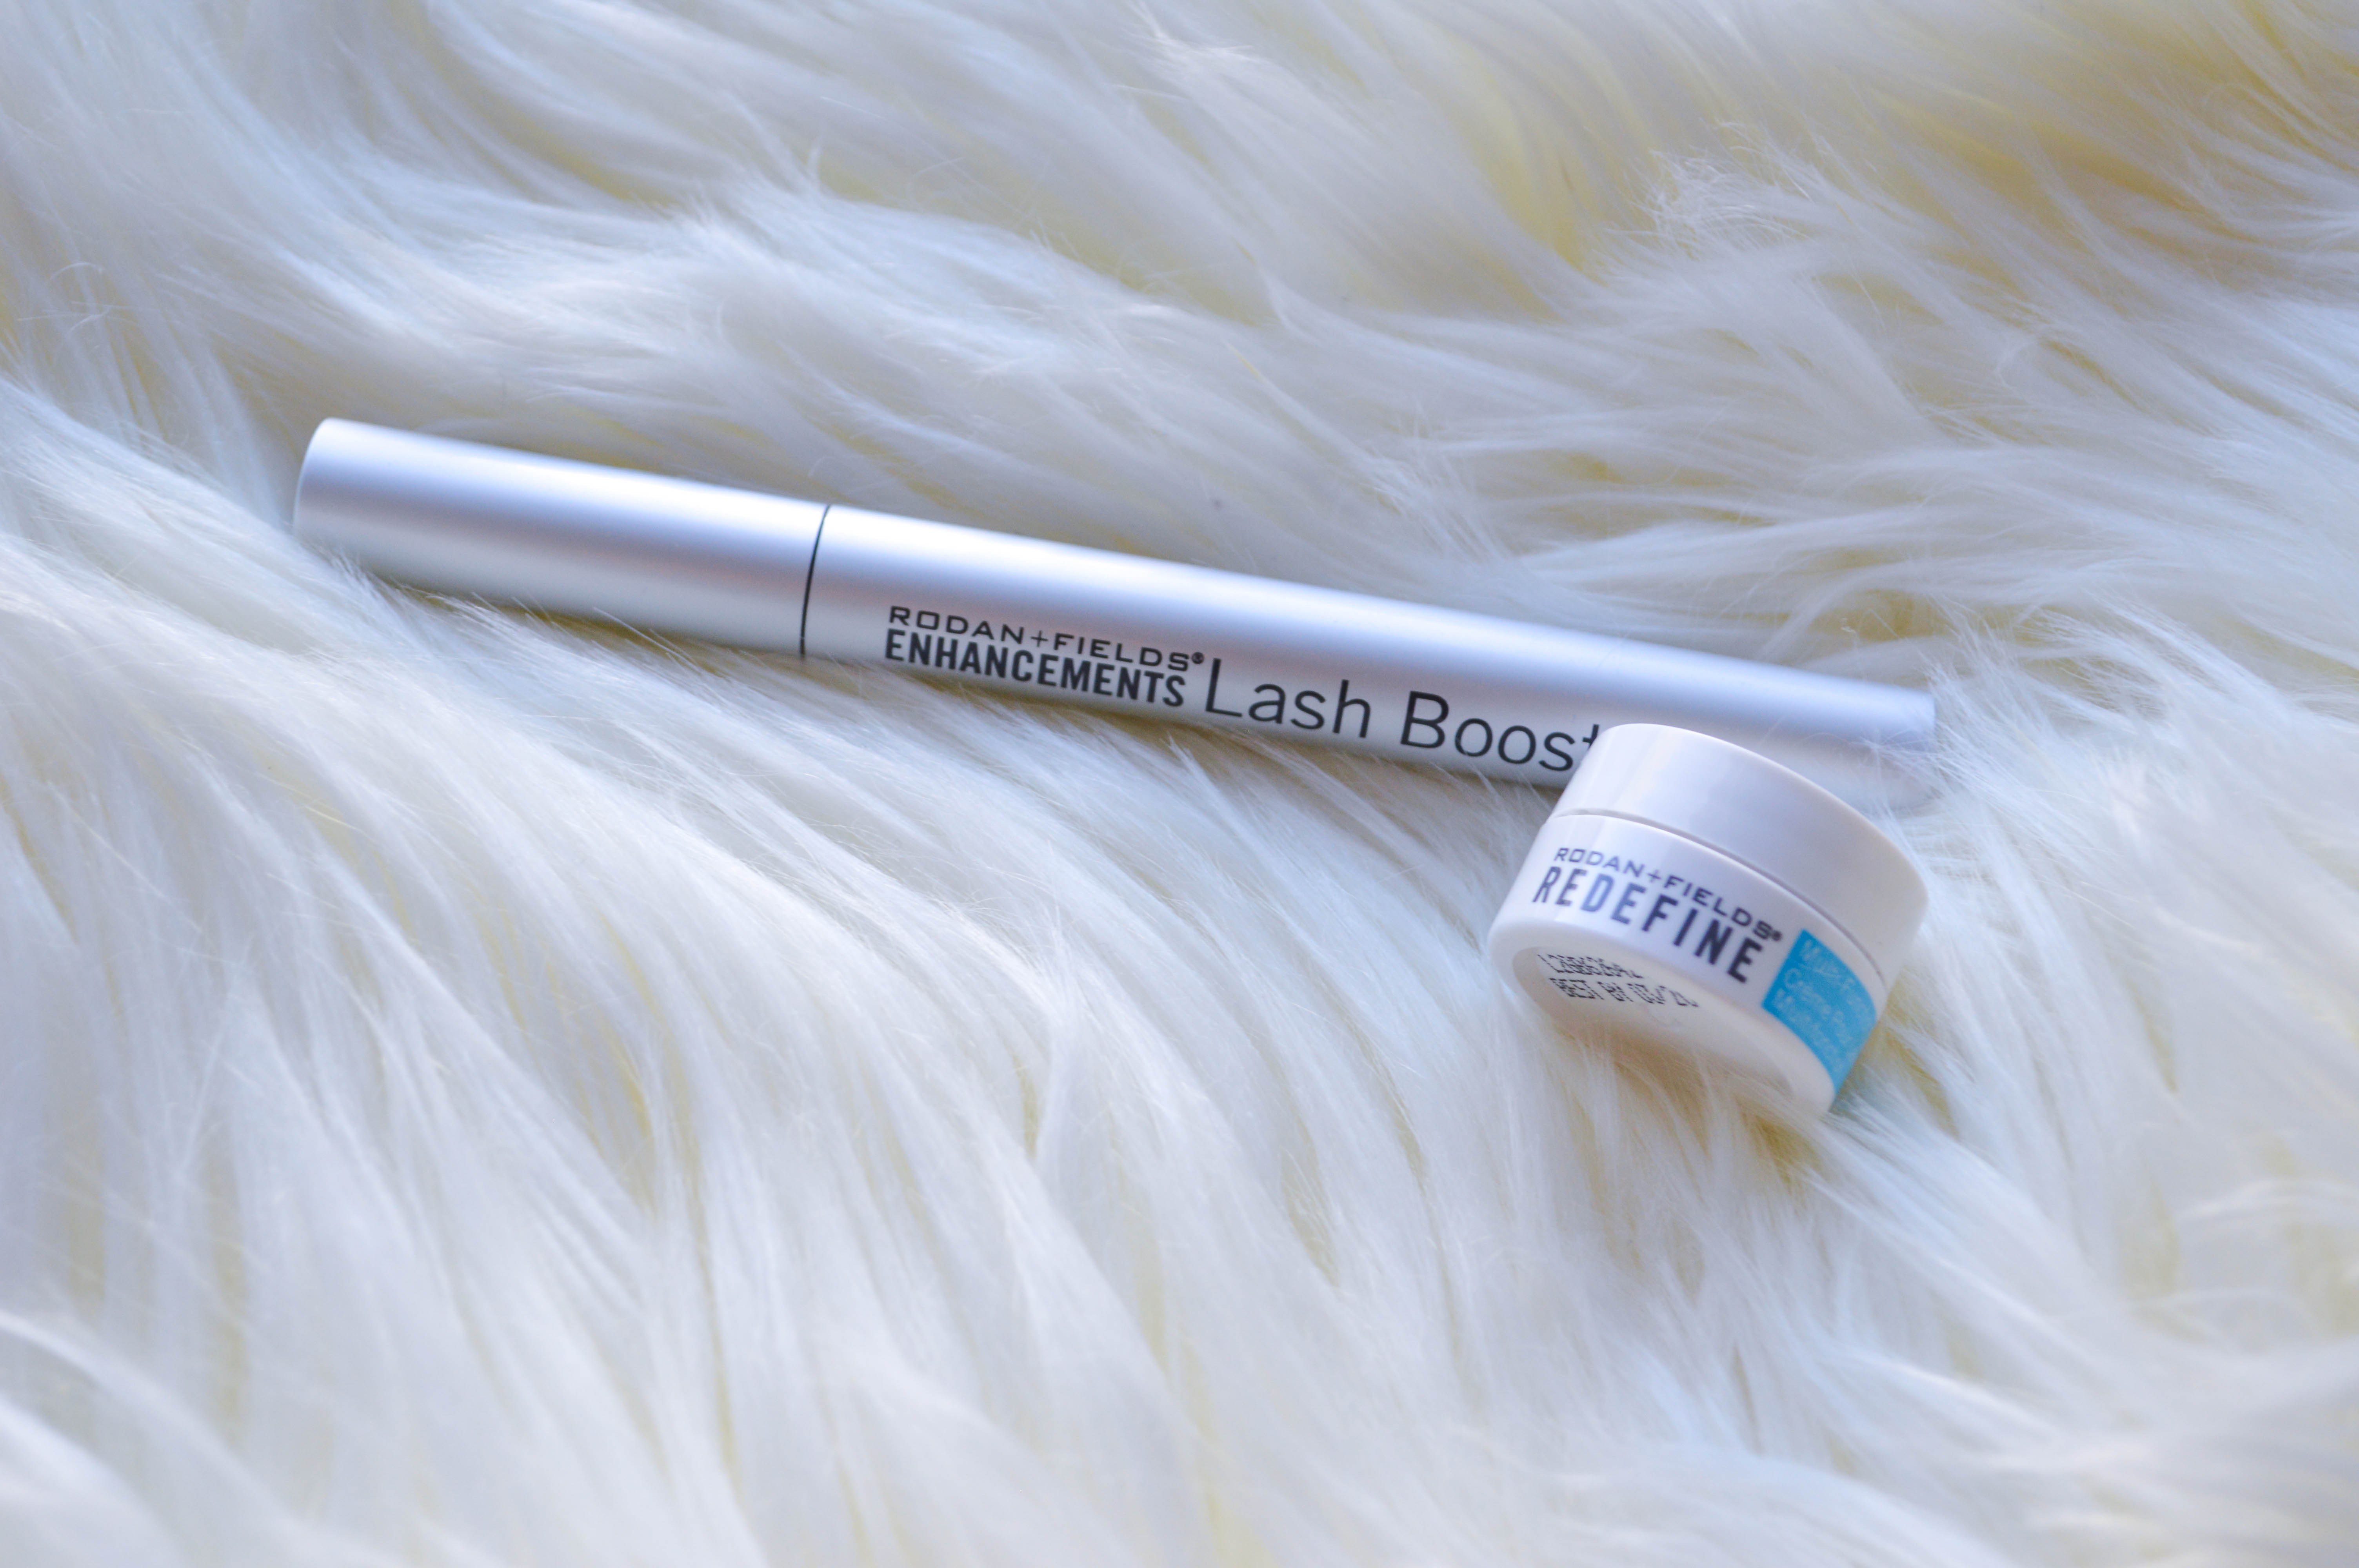 Rodan & Fields Lash Boost review featured by popular Denver life and style blogger, All Things Lovely